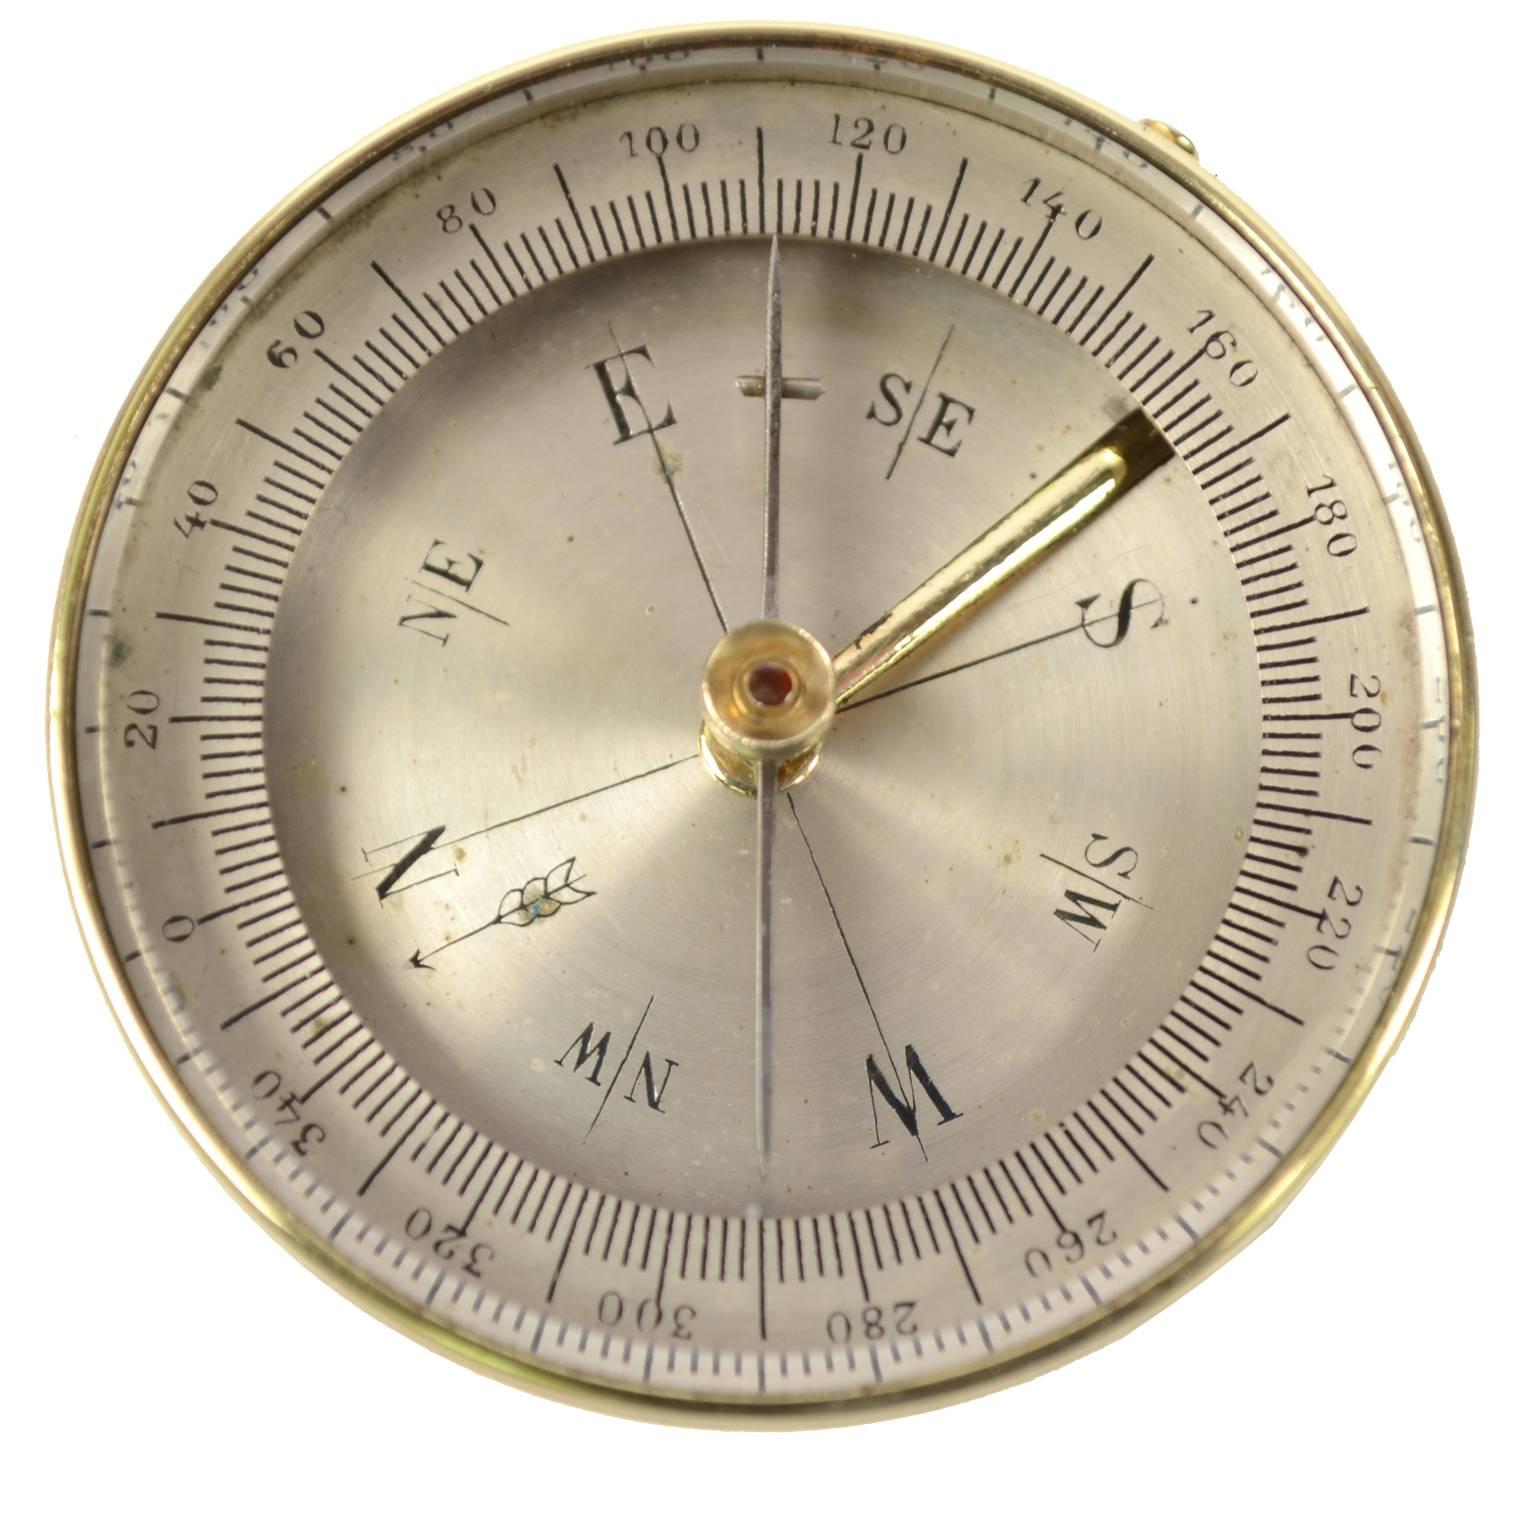 Small travel compass with lid, made of brass; compass card with eight winds and goniometric circle of engraved and chromed brass, complete with needle block to calculate the horizontal angles. German manufacture of the early 1900s. Excellent